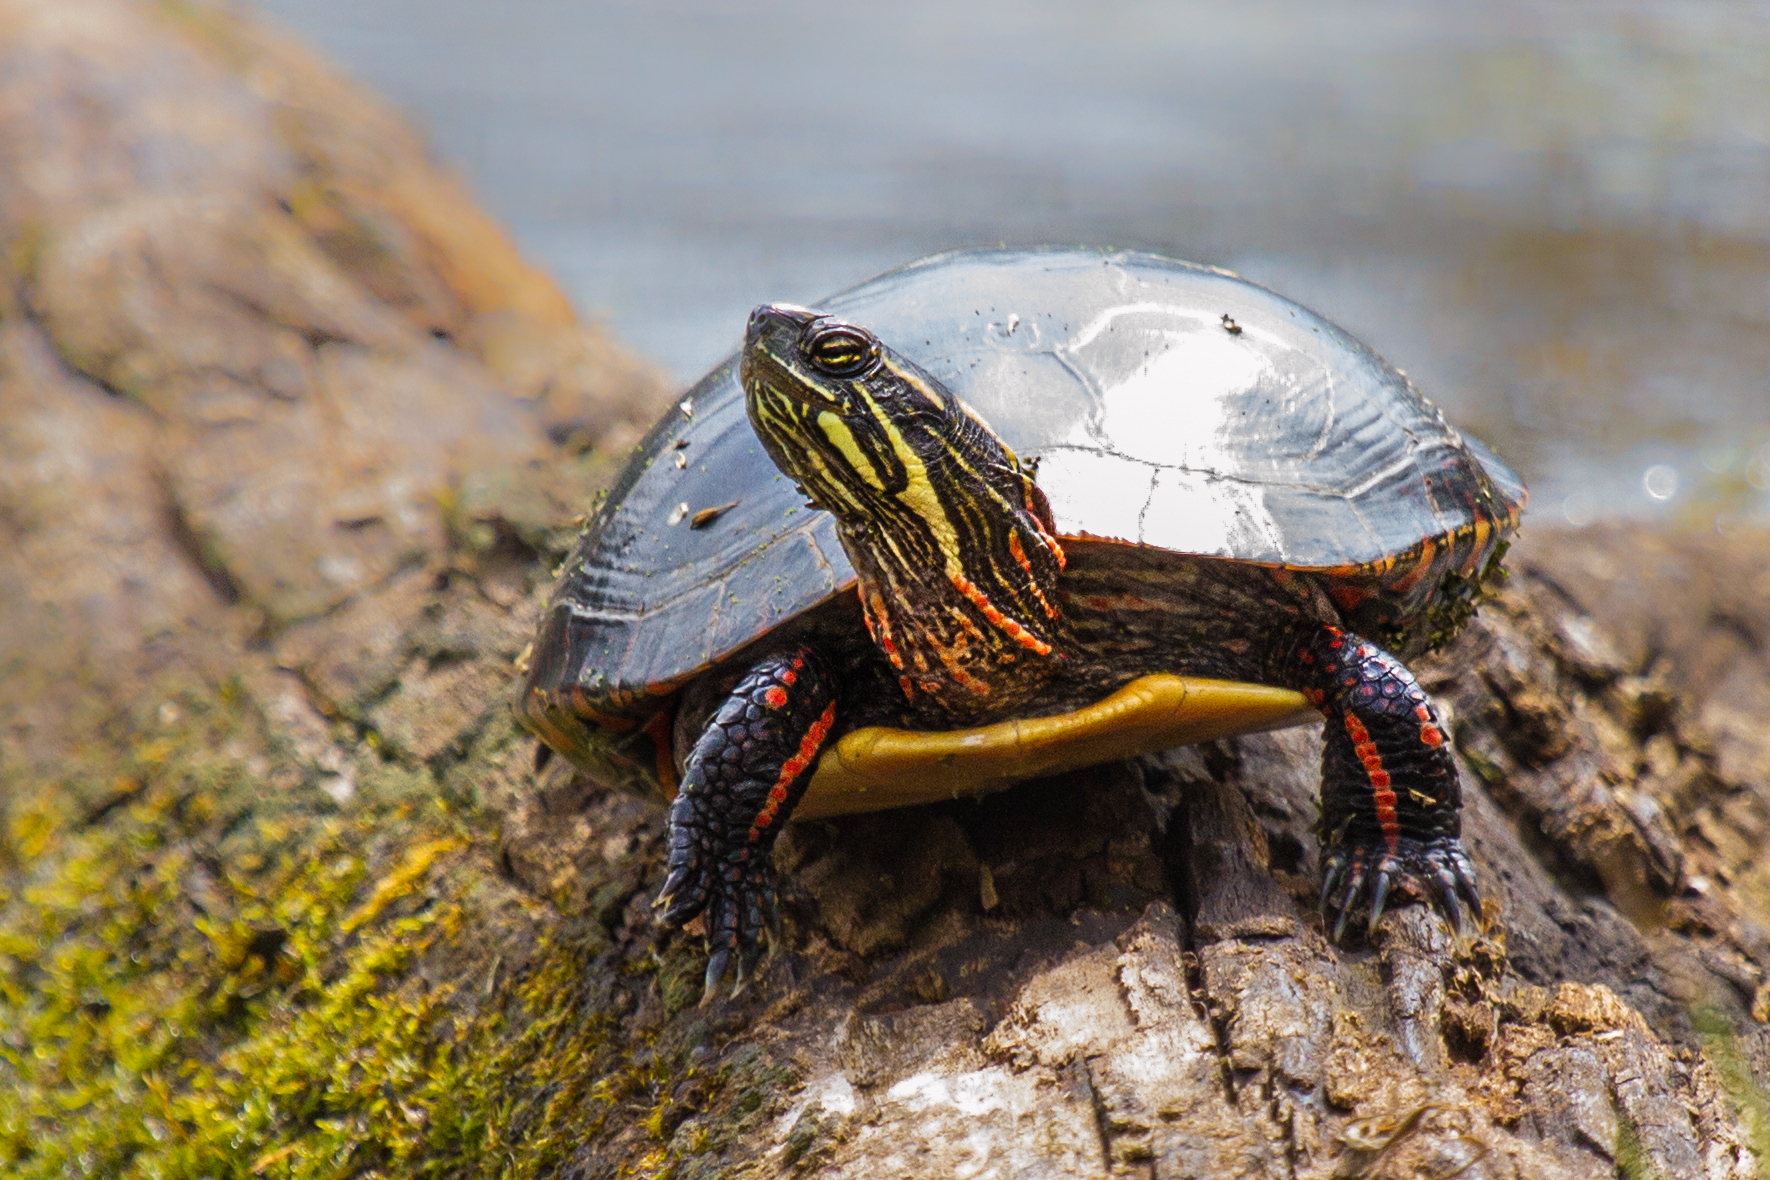 Painted turtle, photo by Laurie Dirkx